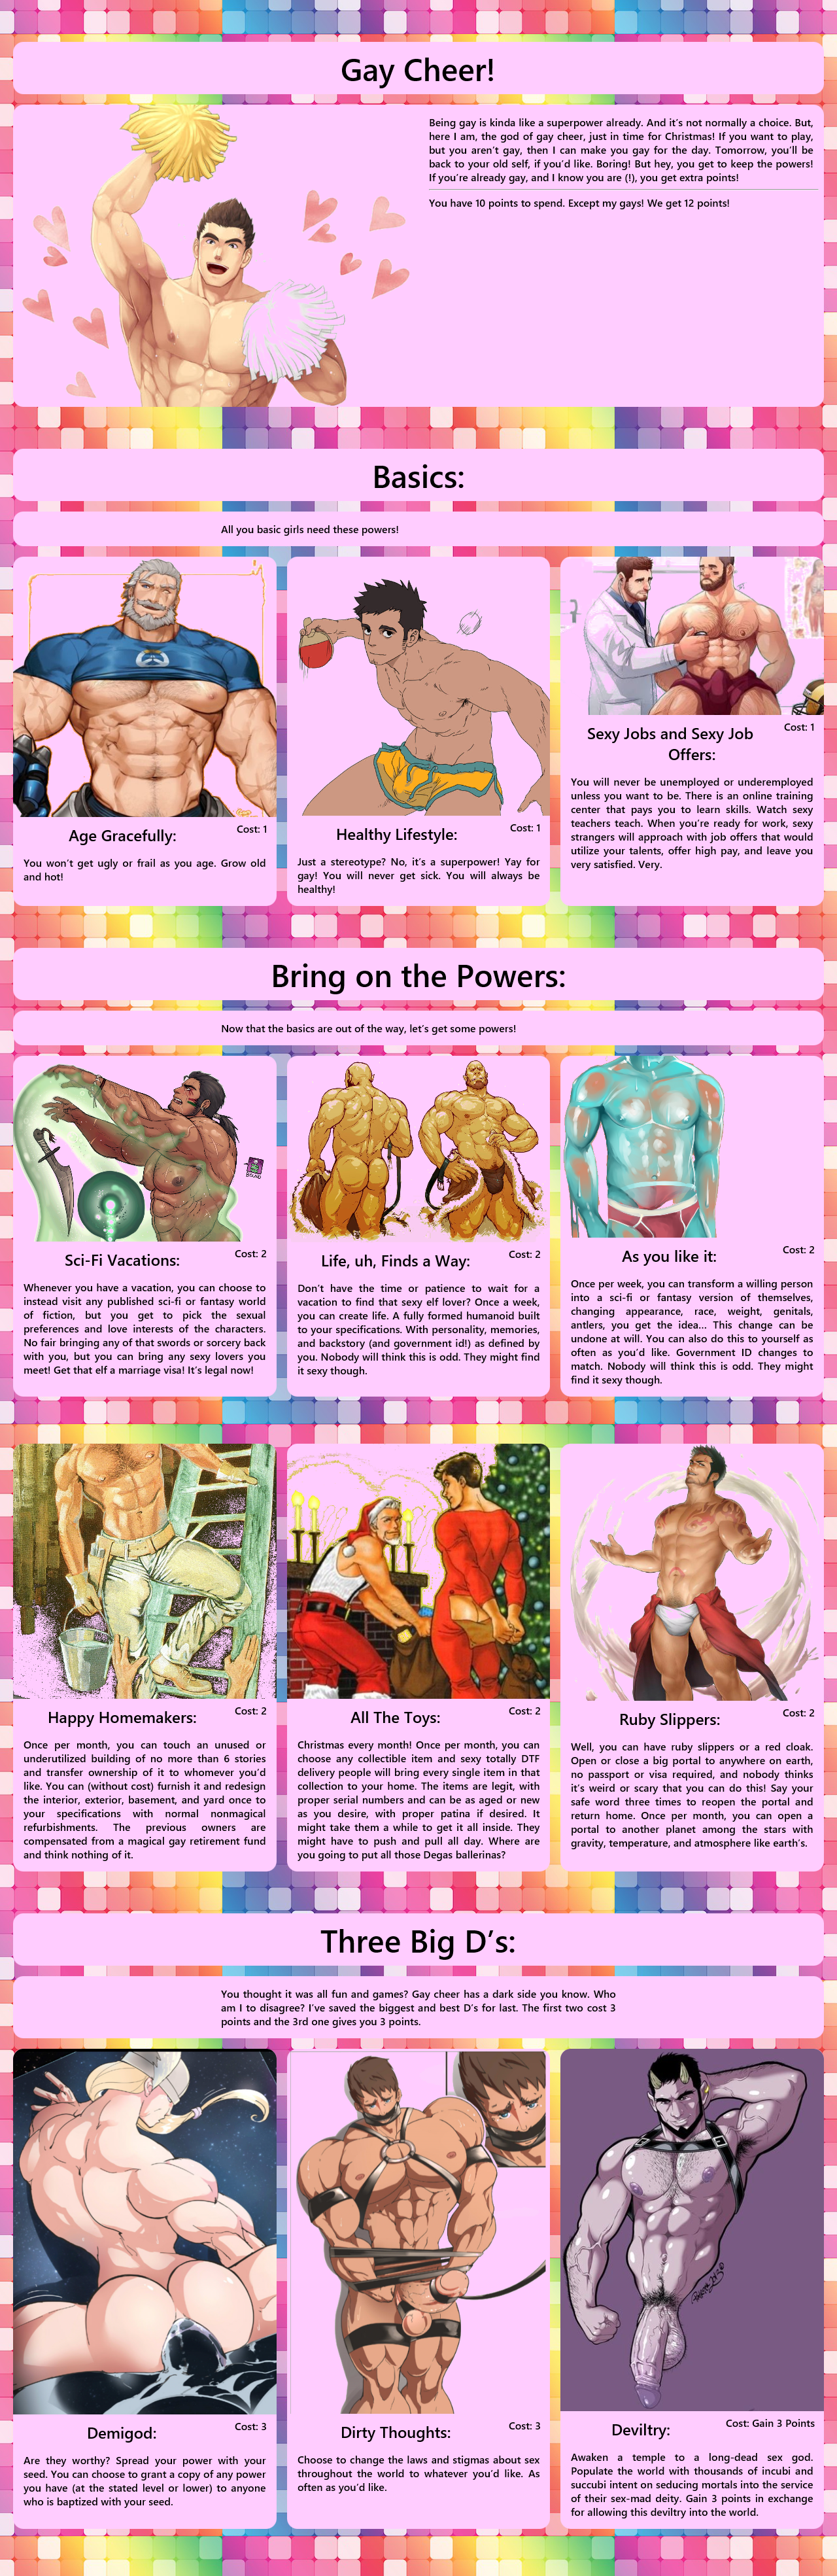 Gay Cheer! CYOA (by youbetterworkxxx) - Image Chest - Free Image Hosting  And Sharing Made Easy